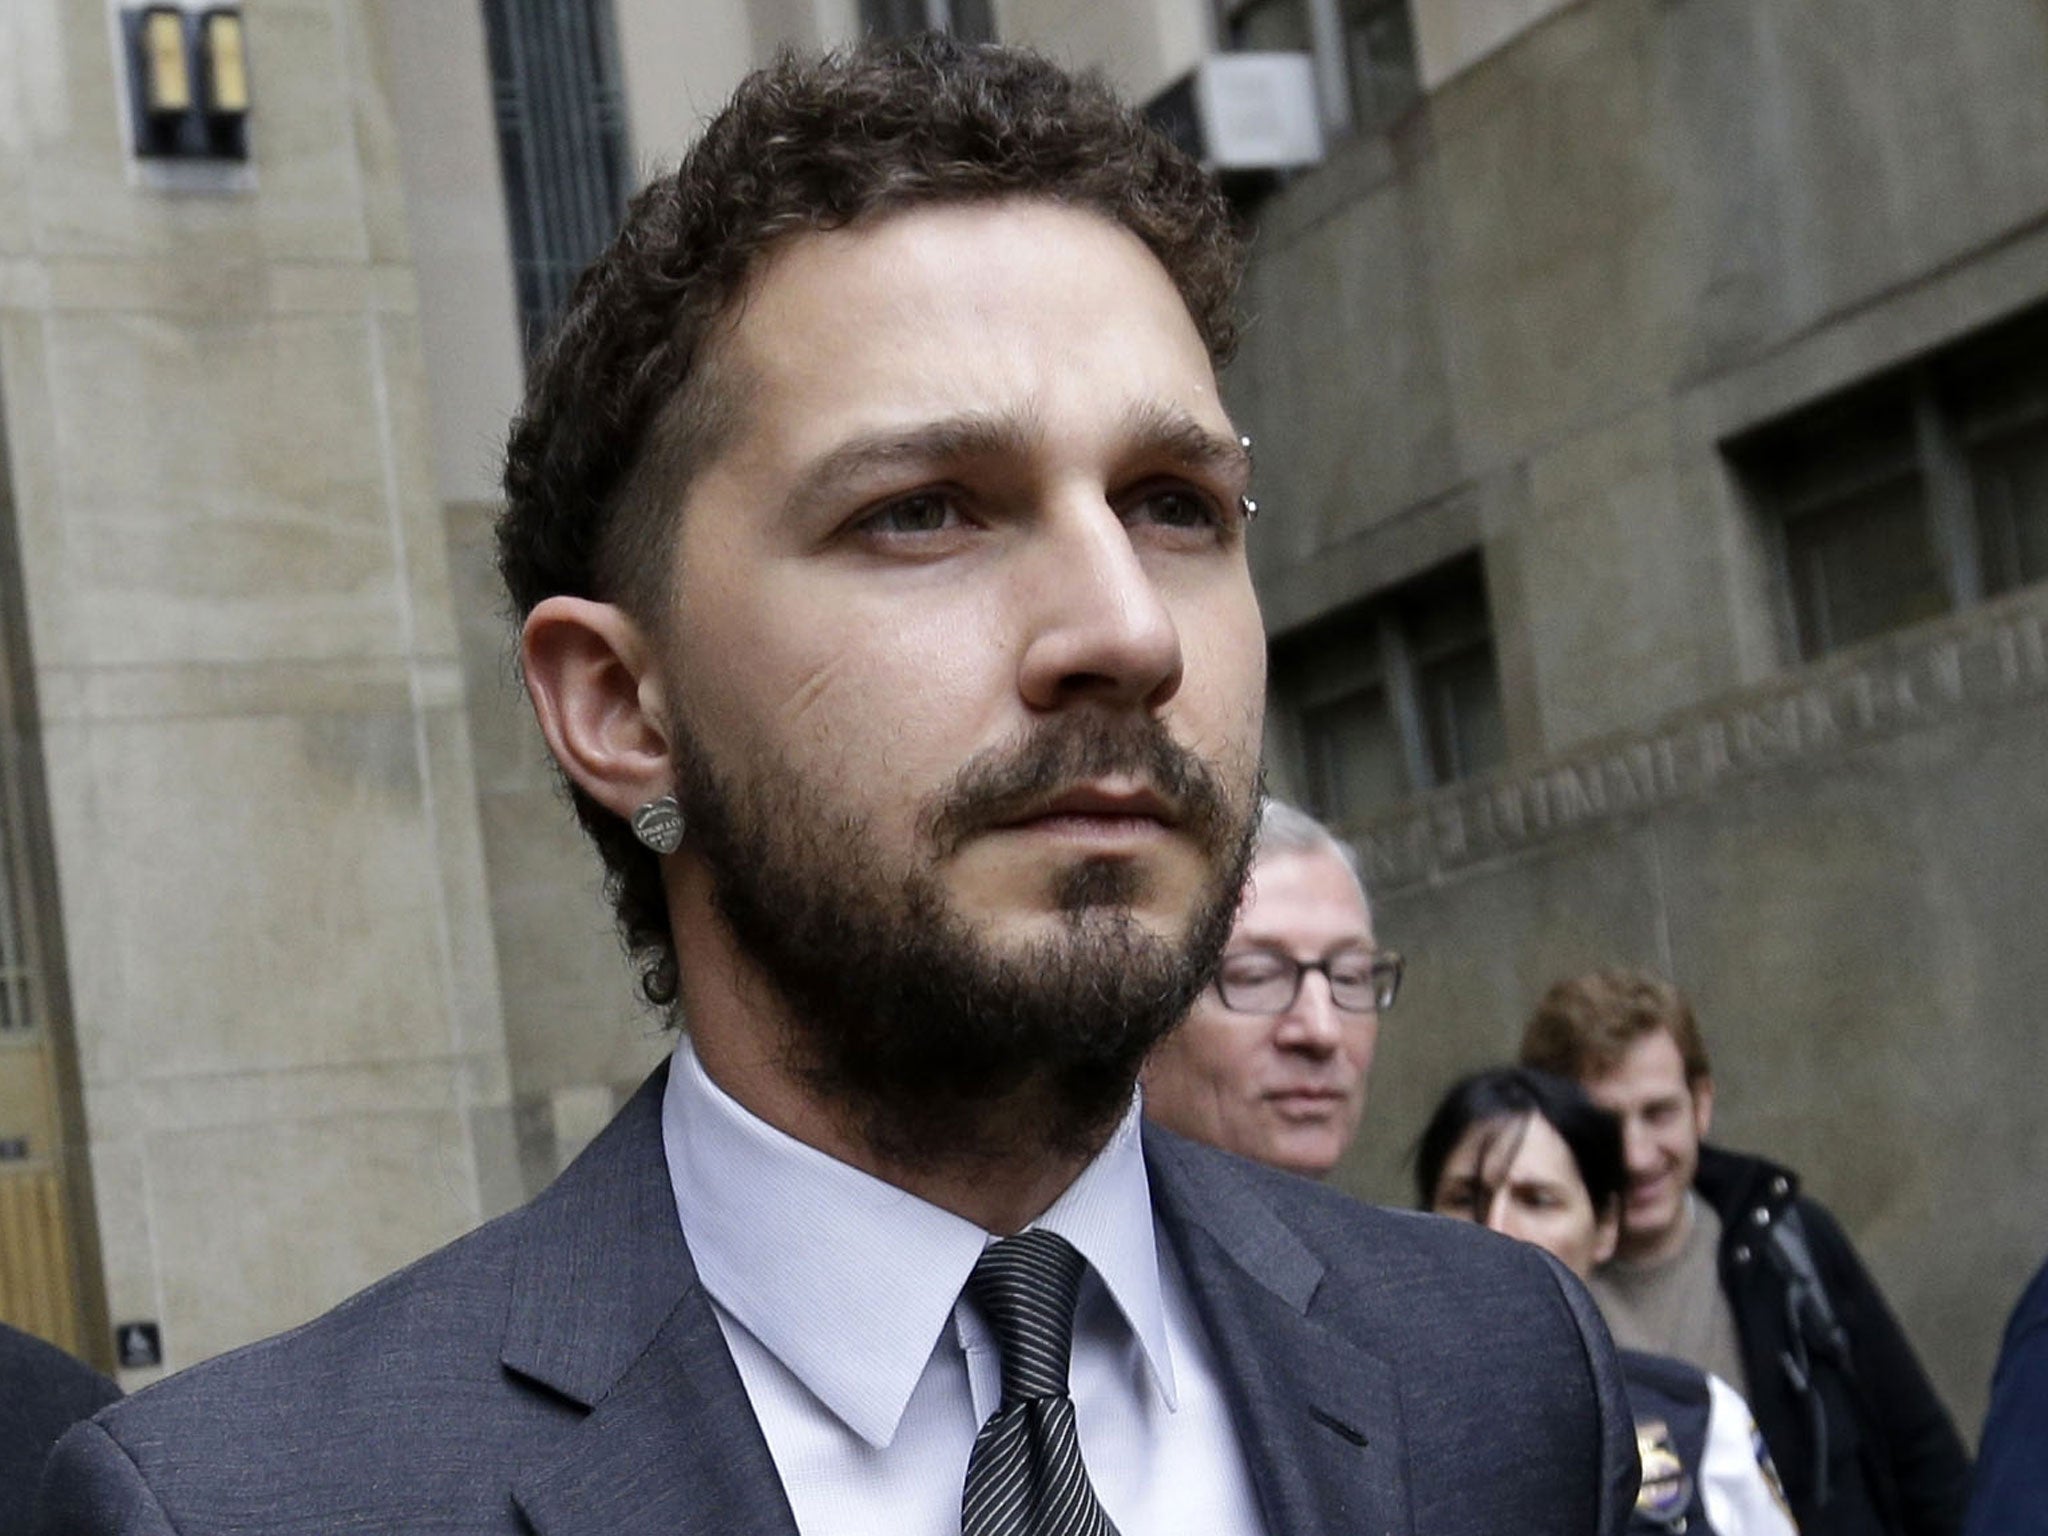 LaBeouf has received stitches to his head and hand after suffering an injury on the North Dakota set of the film American Honey